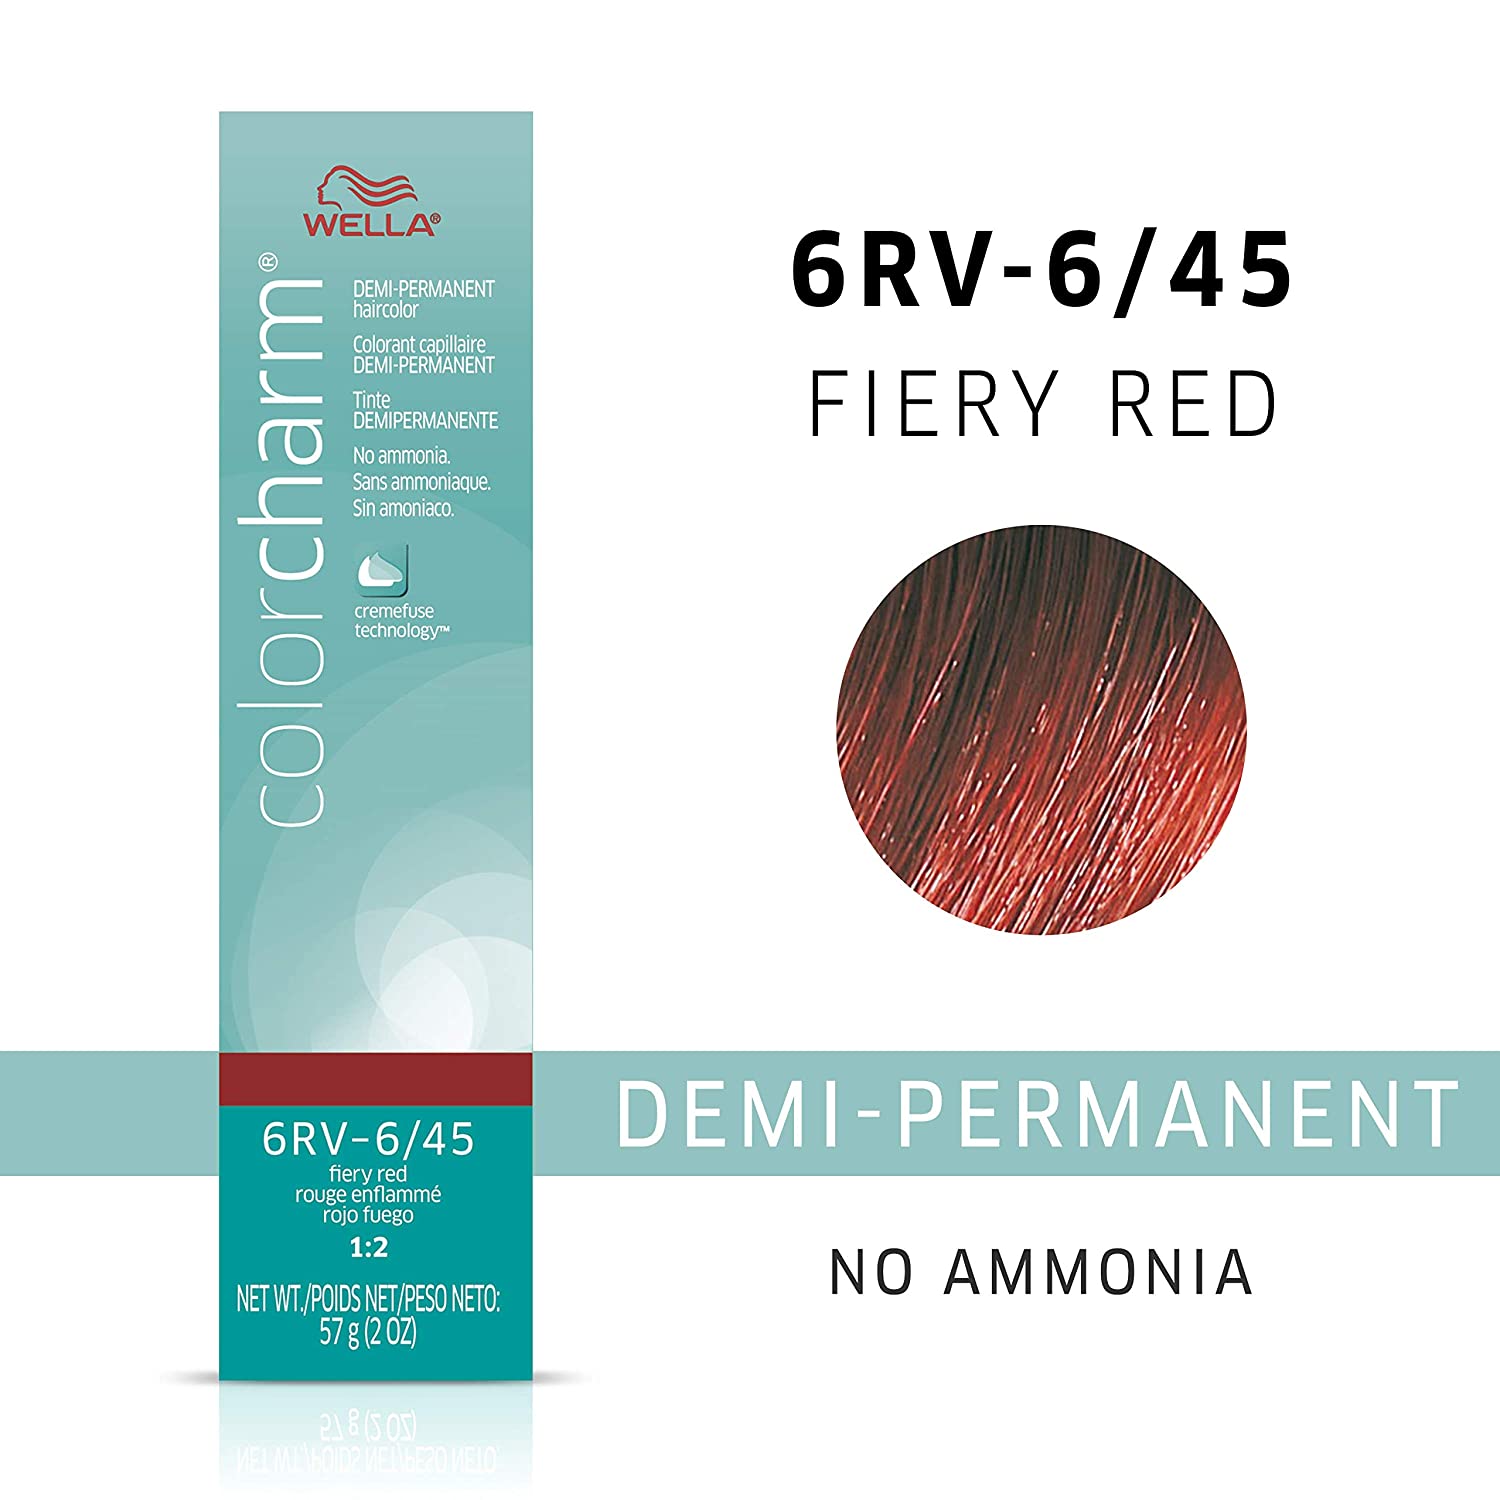 Wella COLOR CHARM, HAIR COLOR Demi-Permanent Haircolor - Color : #6/45 (6RV) FIERY RED - image 4 of 9